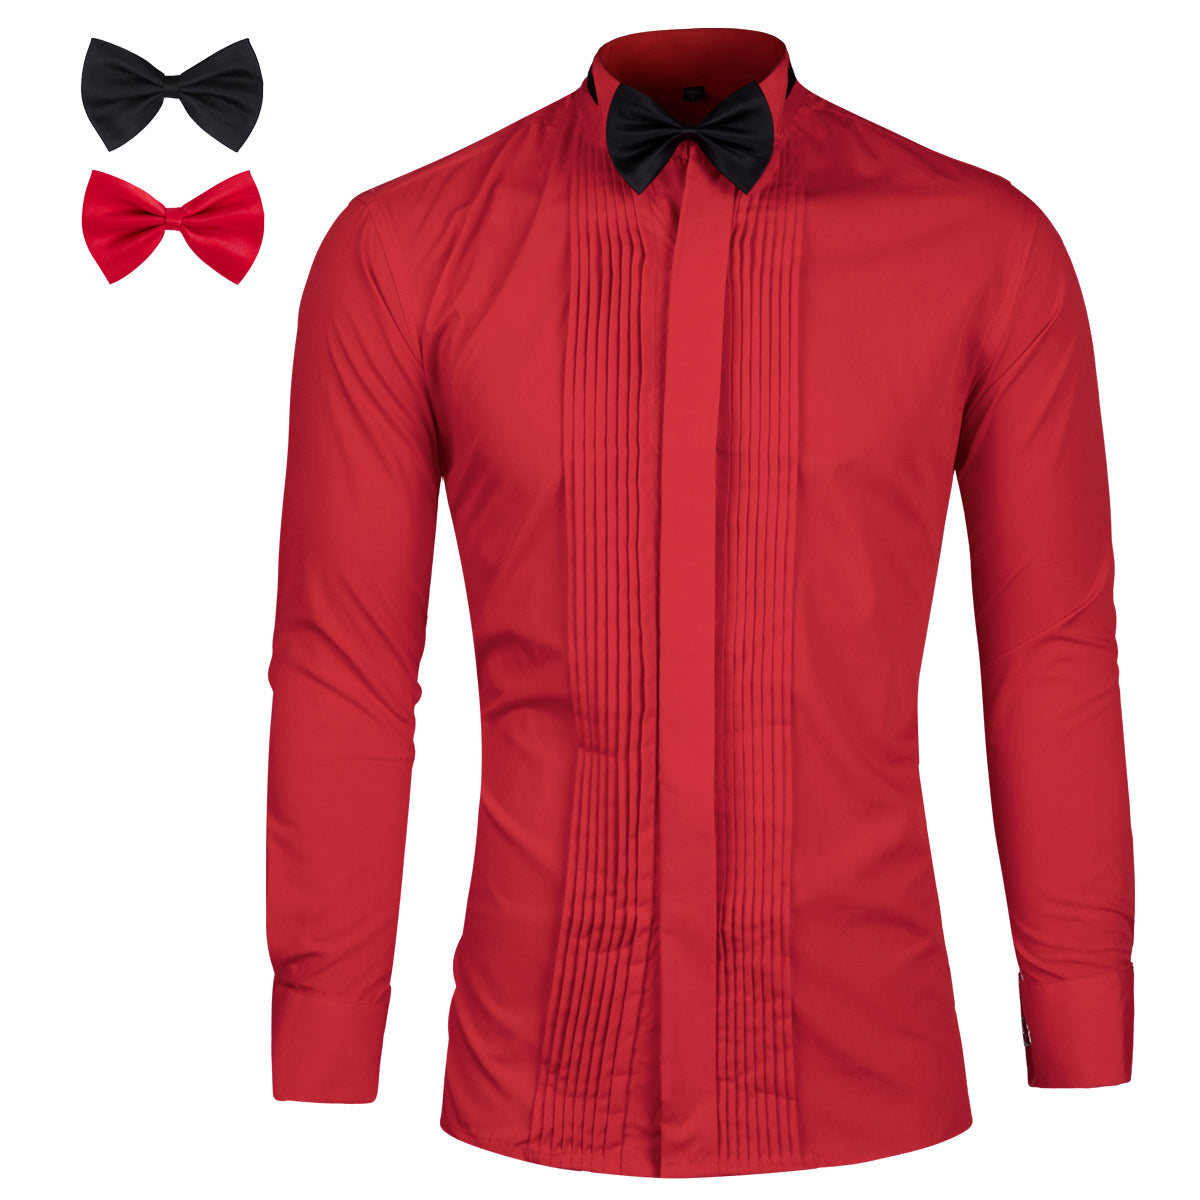 Slim Fit Dress Shirt Red with 2 bow ties